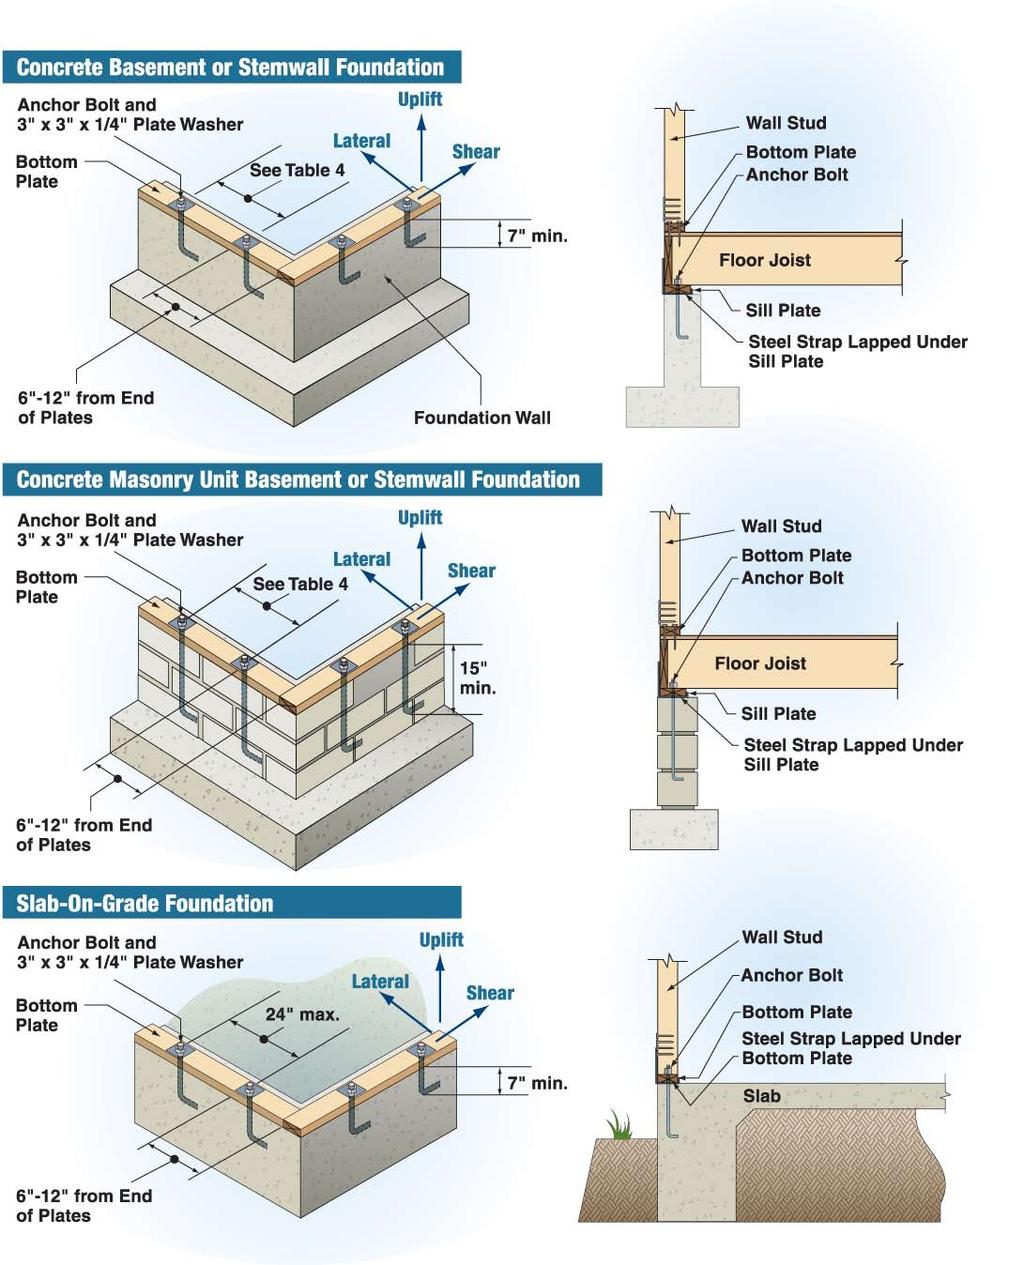 Guide to Wood Construction in High Wind Areas 9 2 